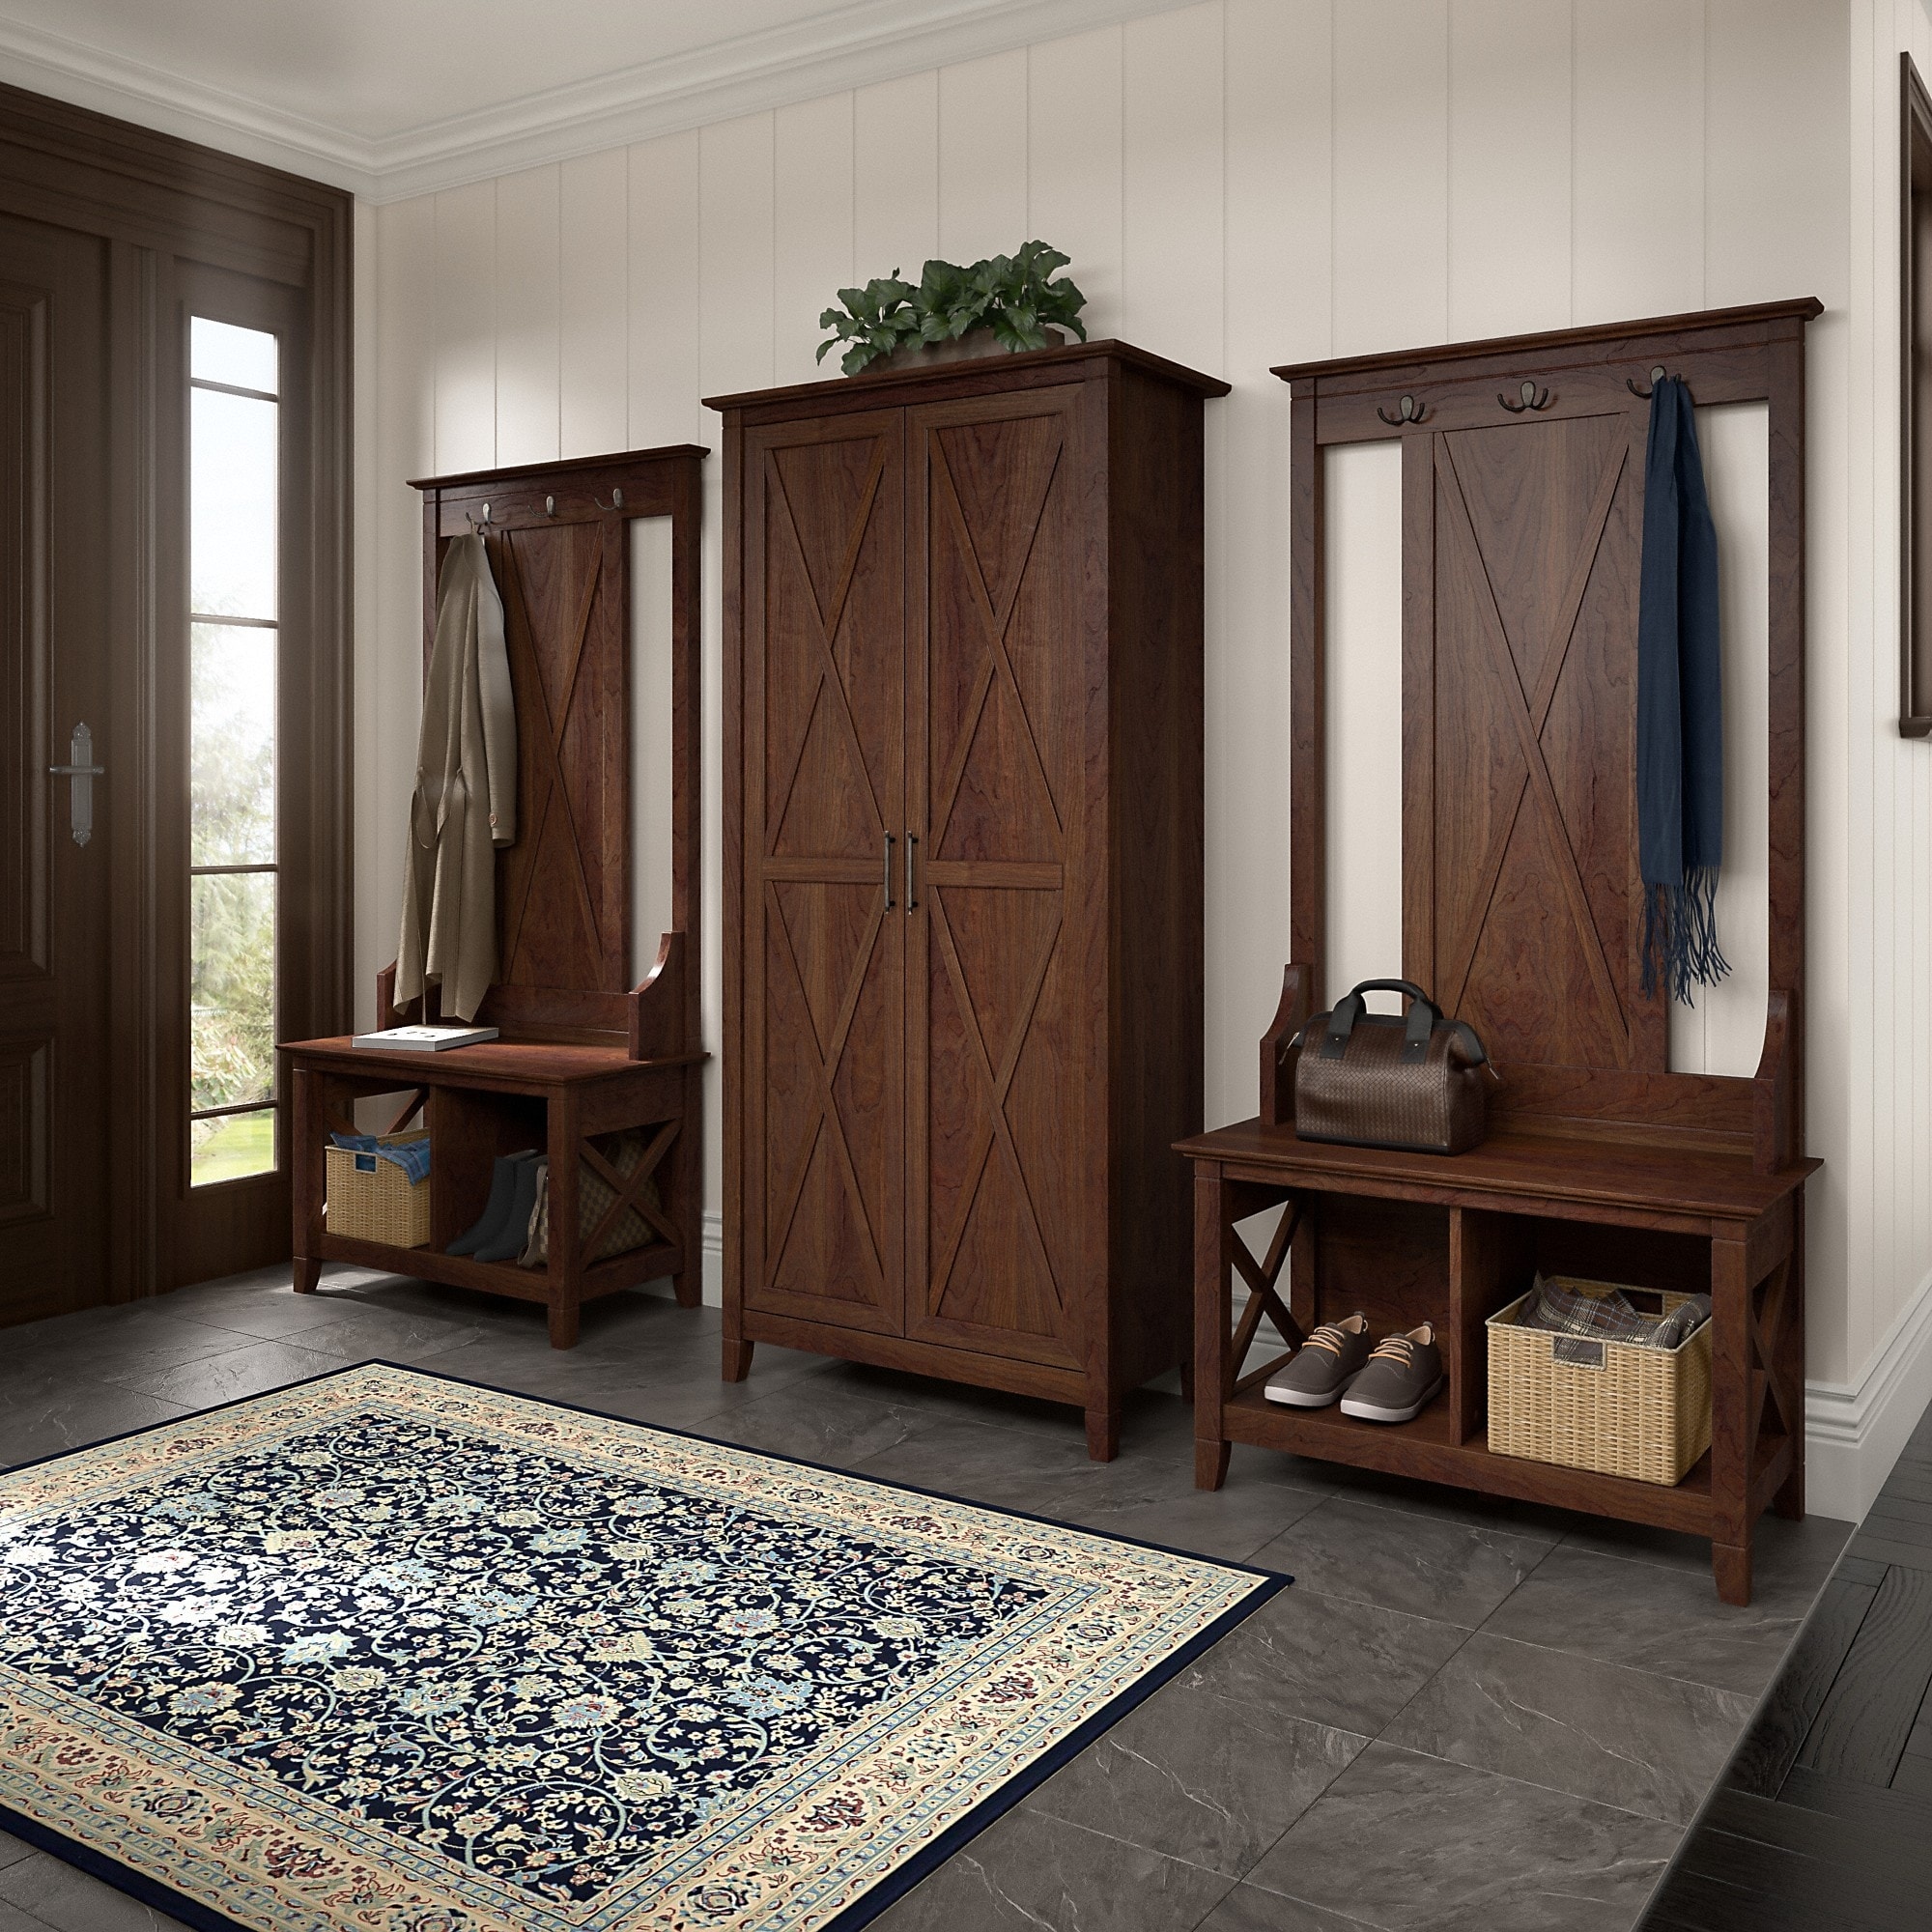 https://ak1.ostkcdn.com/images/products/is/images/direct/0c4a4dd6646276d423bceae8ad3be38ea15bb188/Key-West-Entryway-Storage-Set-with-Tall-Cabinet-by-Bush-Furniture.jpg